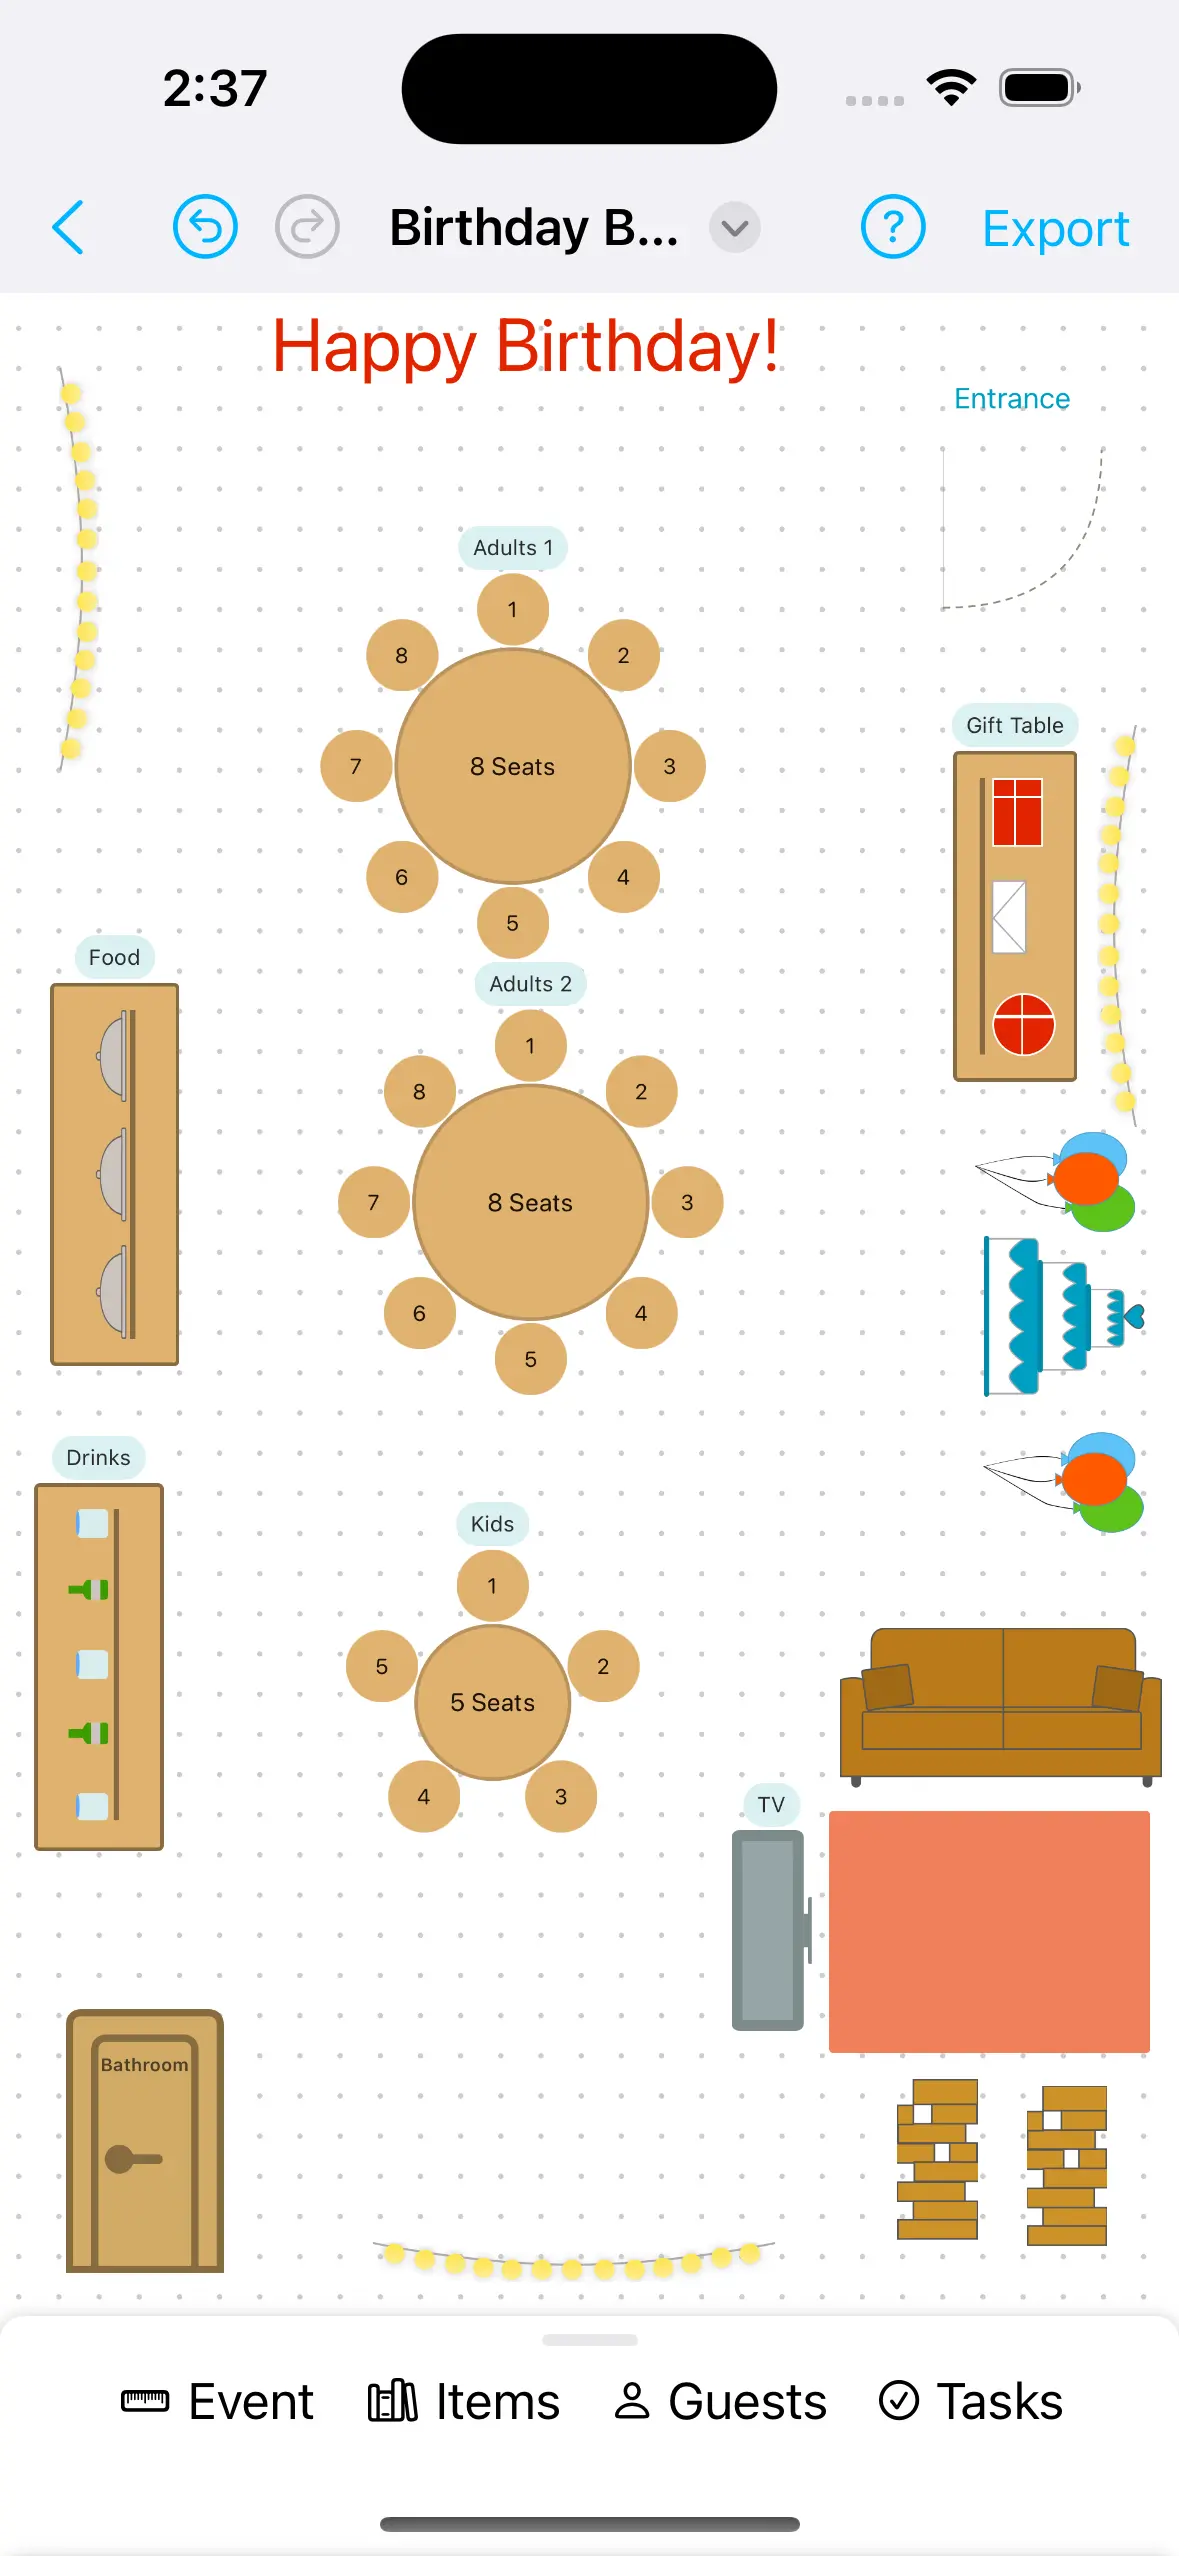 Example of a birthday party layout diagram